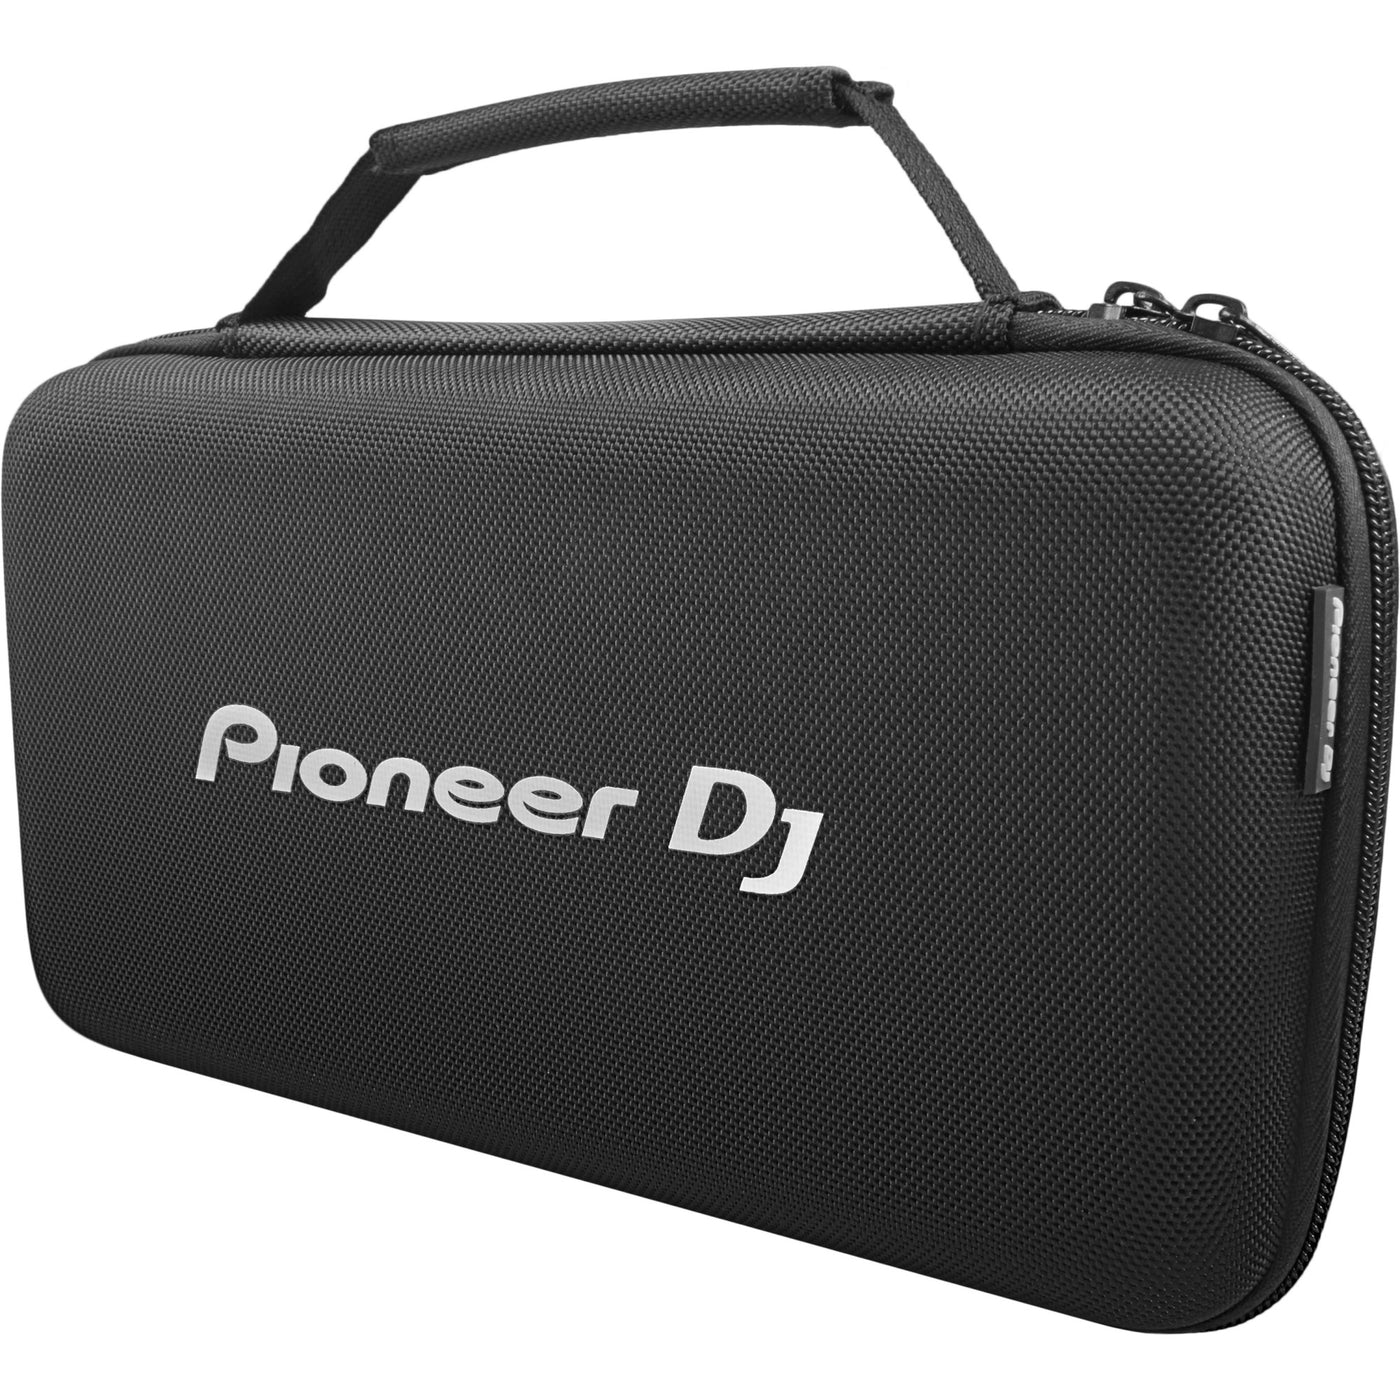 Pioneer DJ DJC-IF2 BAG Controller Bag for the INTERFACE2, Storage for Professional Audio DJ Equipment